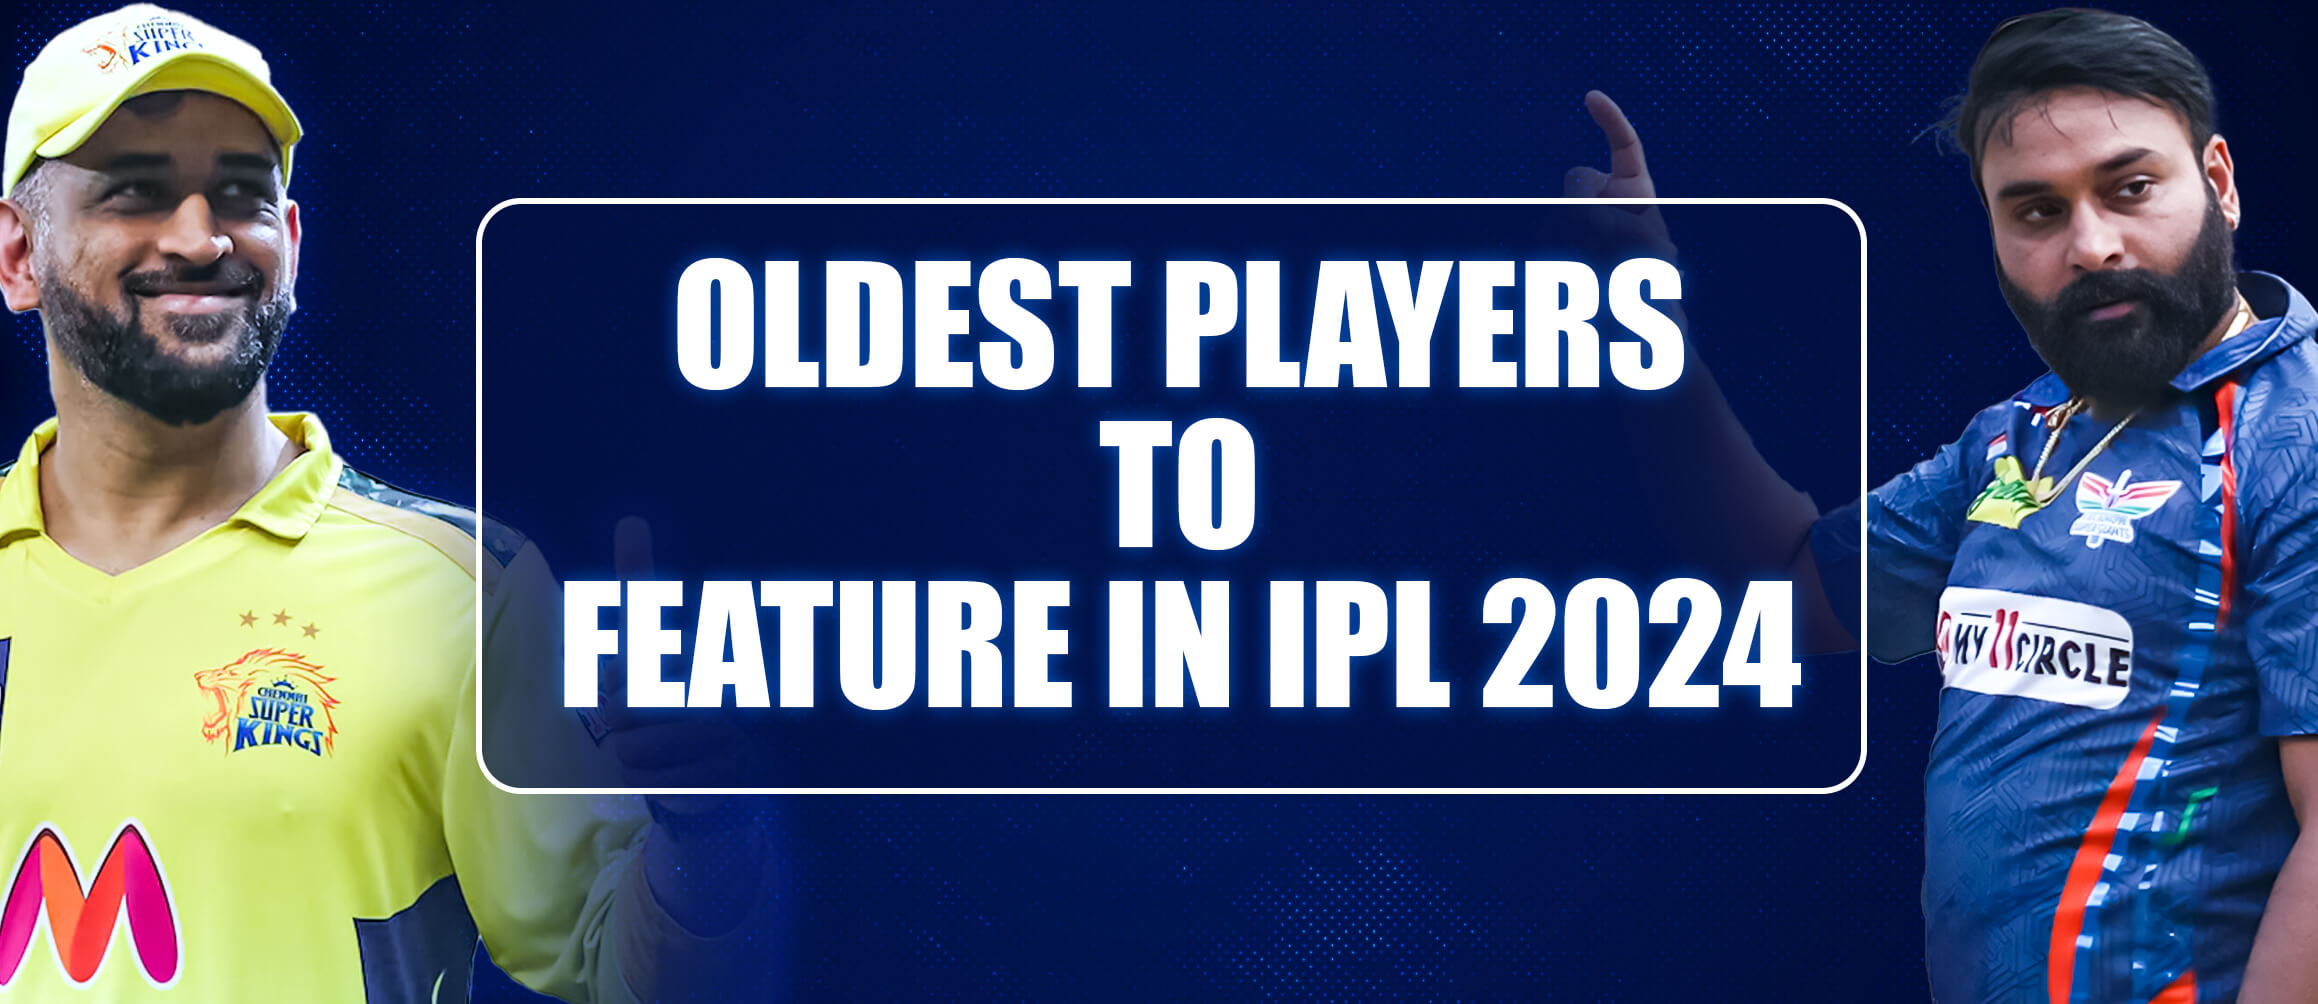 Oldest Players to Feature in IPL 2024